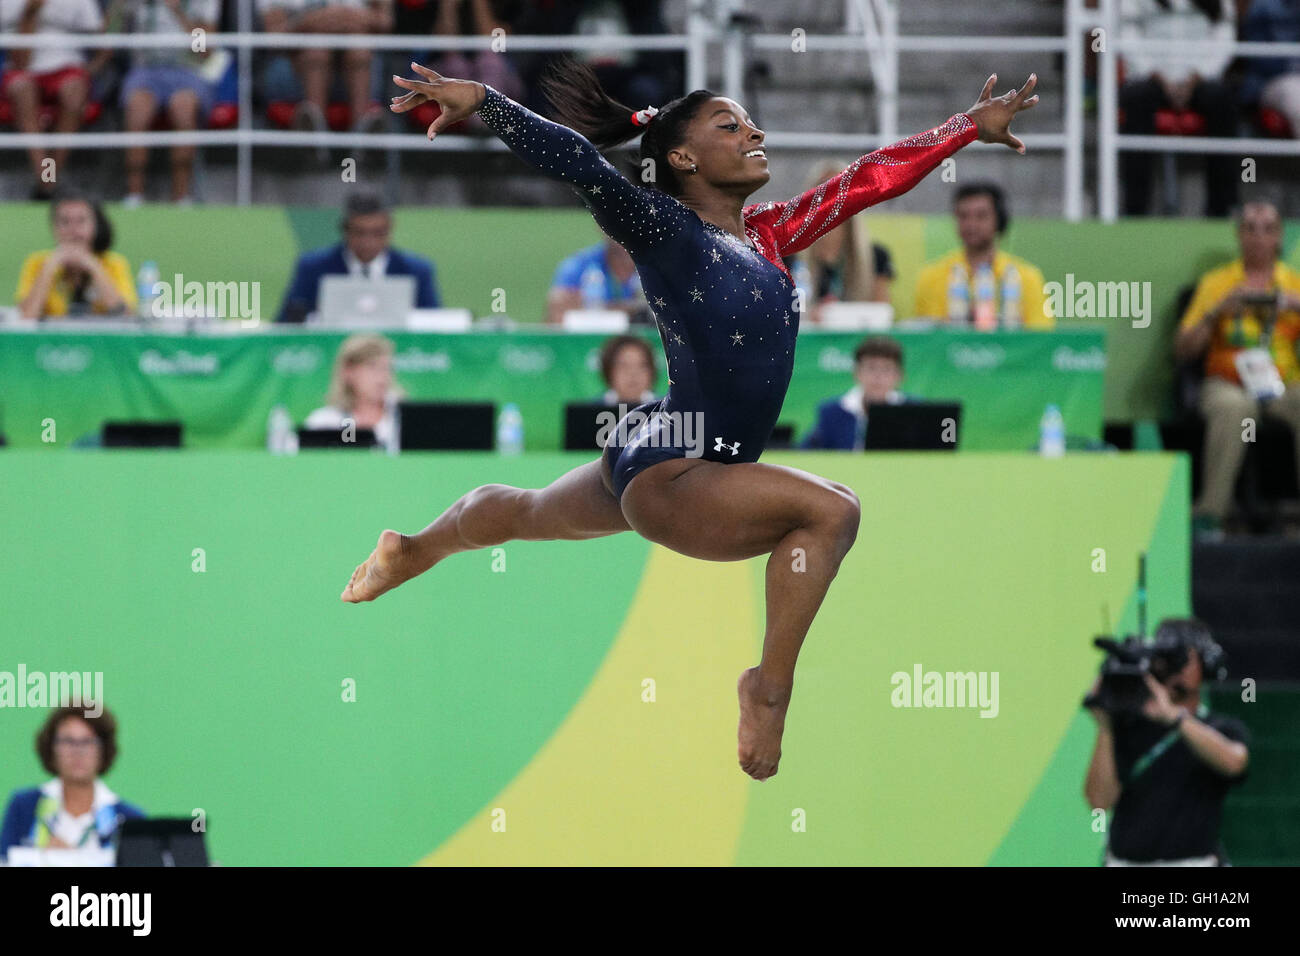 Rio de Janeiro, Brazil. 07th Aug, 2016. Simone Biles of the United States acts during women's qualification match of floor exercise of Artistic Gymnastics at the 2016 Rio Olympic Games in Rio de Janeiro, Brazil, on Aug. 7, 2016.?Xinhua/Zheng Huansong?(xr) Credit:  Xinhua/Alamy Live News Stock Photo